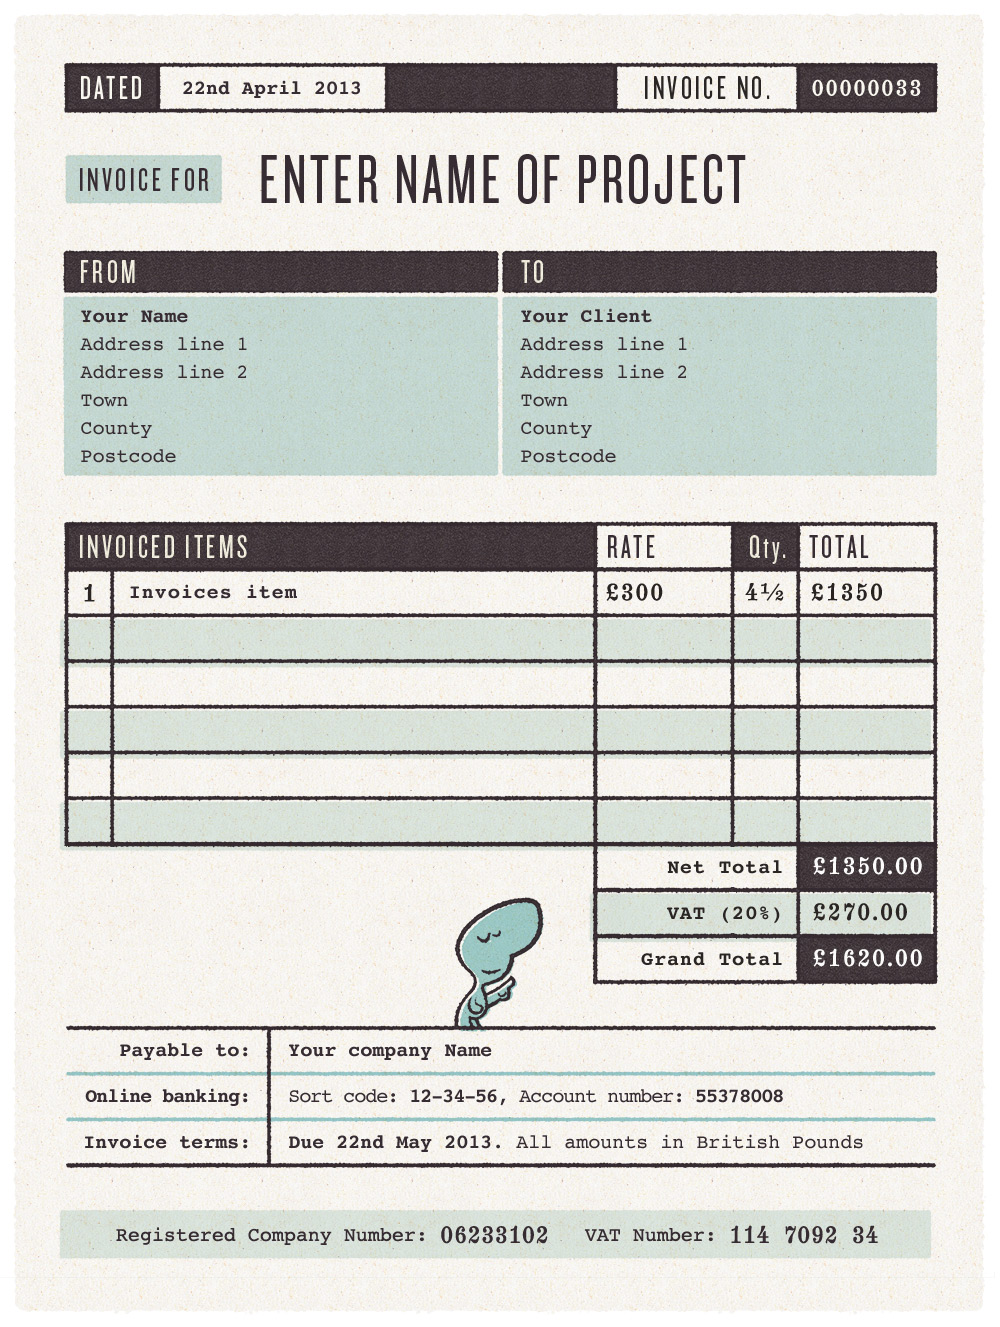 Invoice Template Made In England